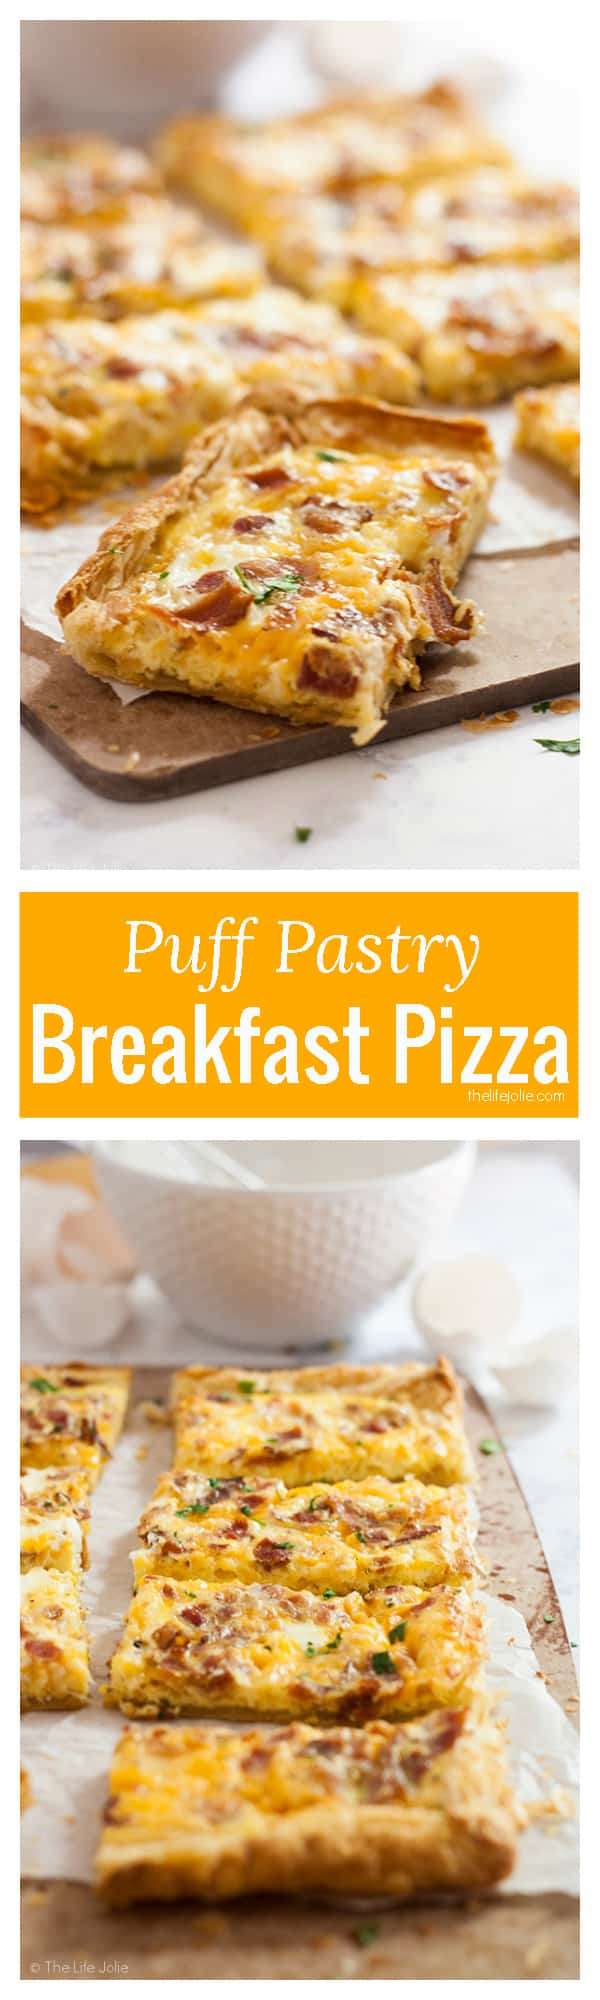 This Puff Pastry Breakfast Pizza recipe is super easy and fast. You can put whatever toppings on it, but I love it with bacon, eggs and cheese. This is great for brunch, Christmas morning or a nice,relaxing weekend breakfast!